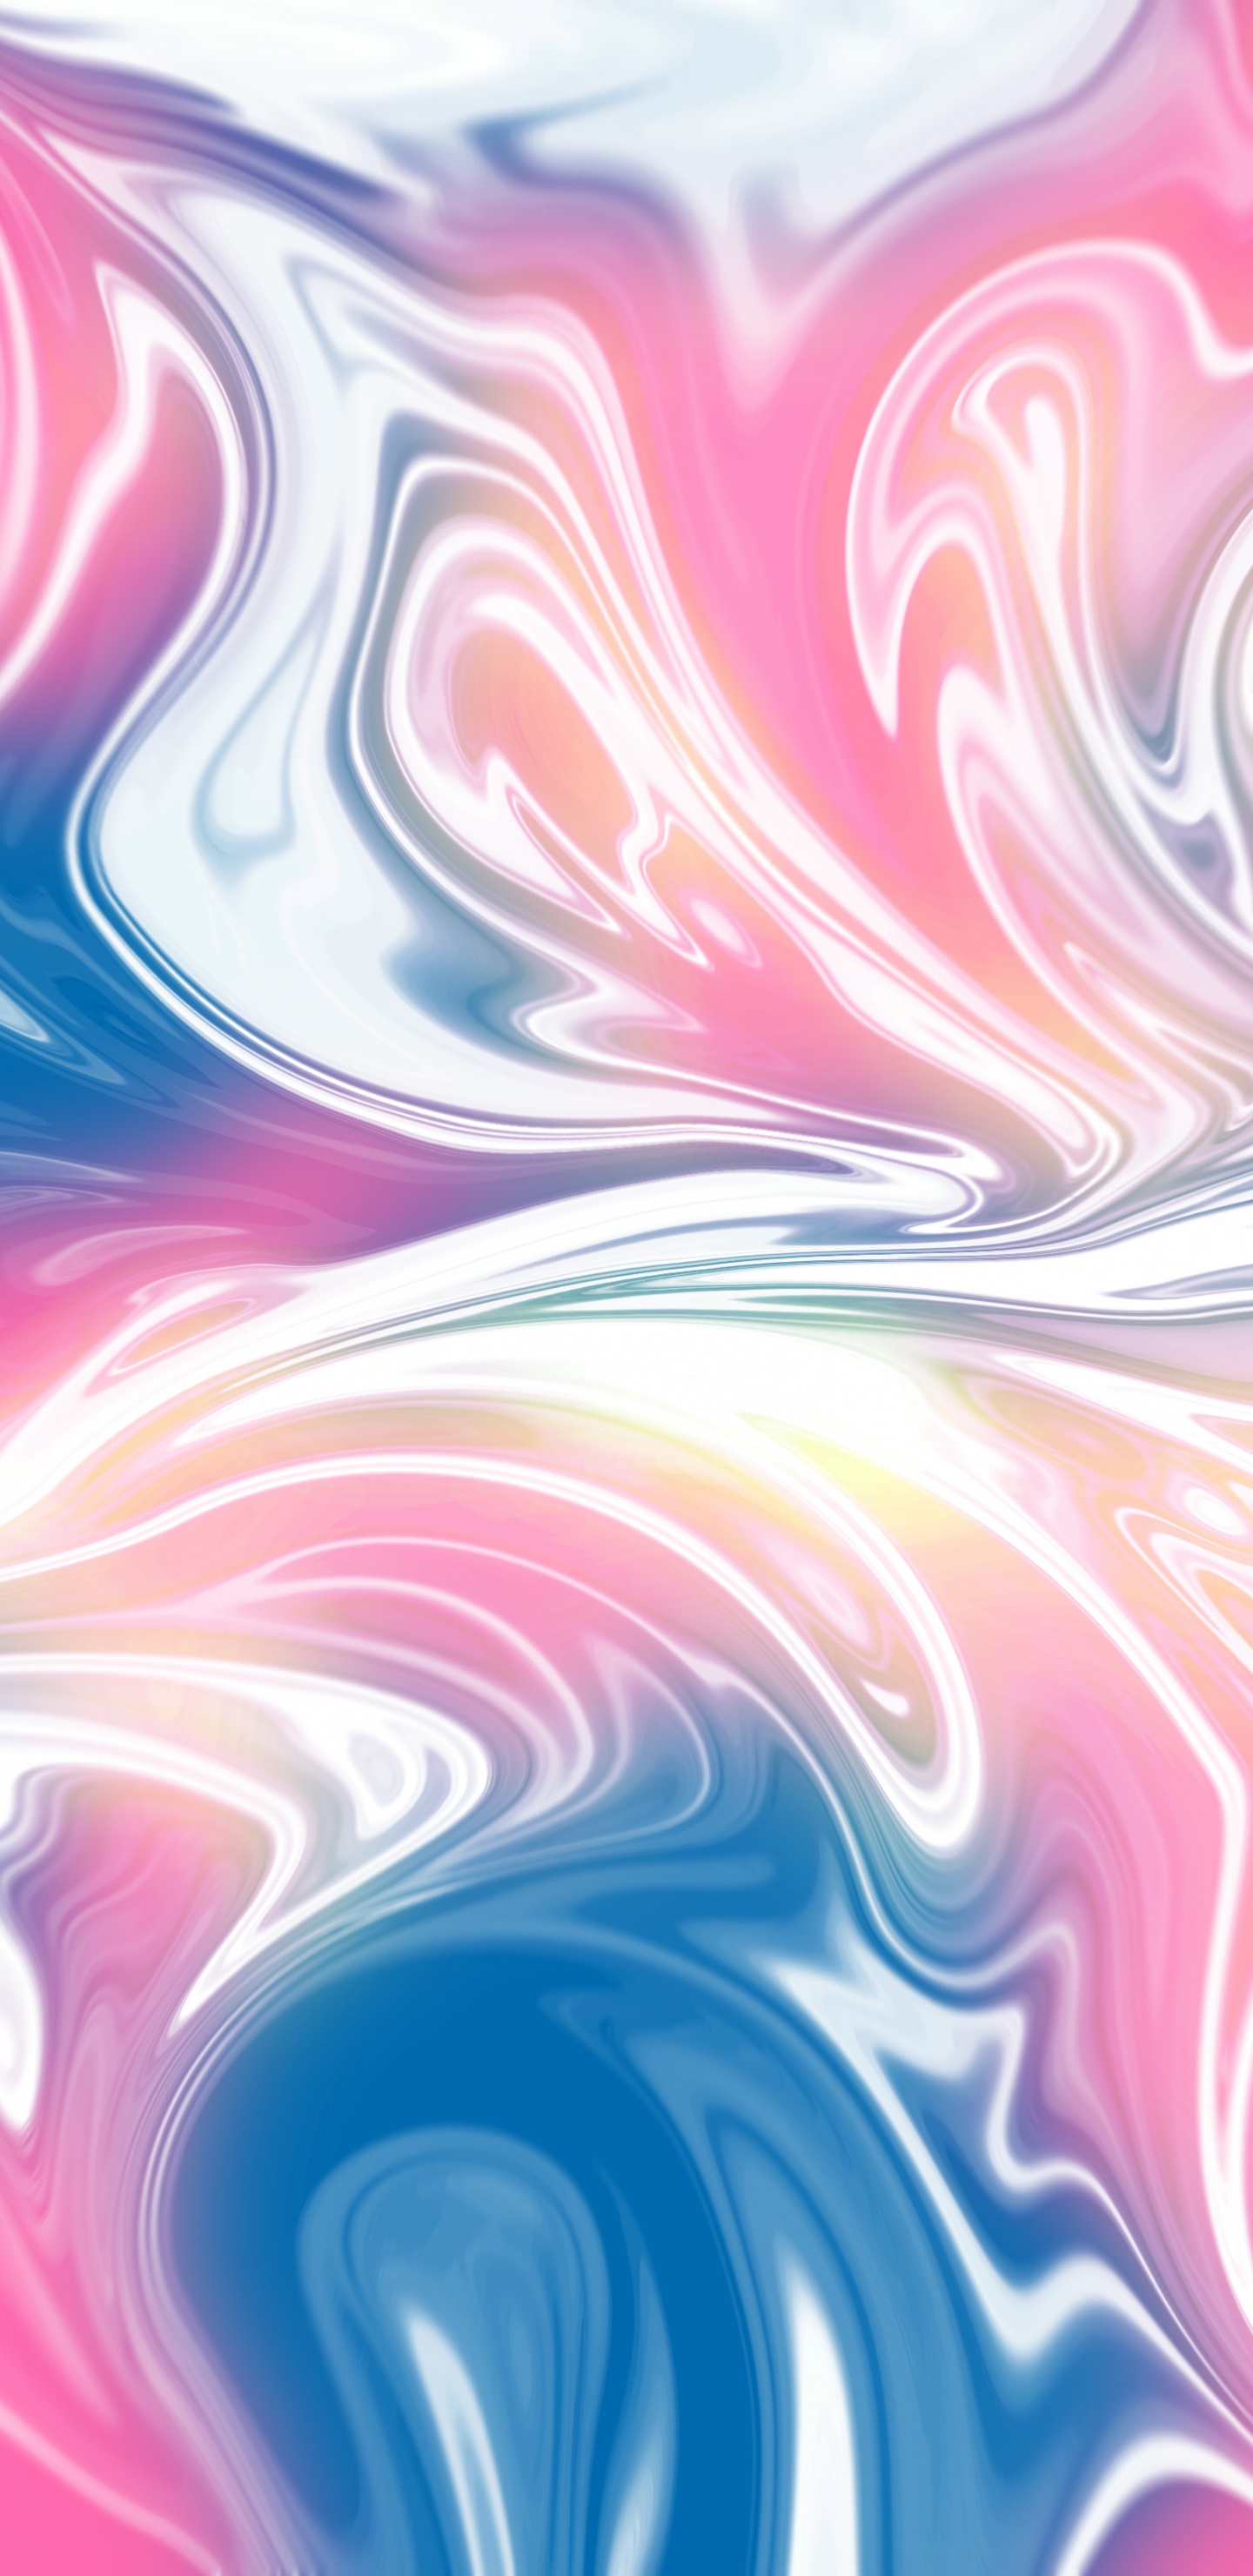 Pink White and Blue Abstract Painting. Wallpaper in 1440x2960 Resolution